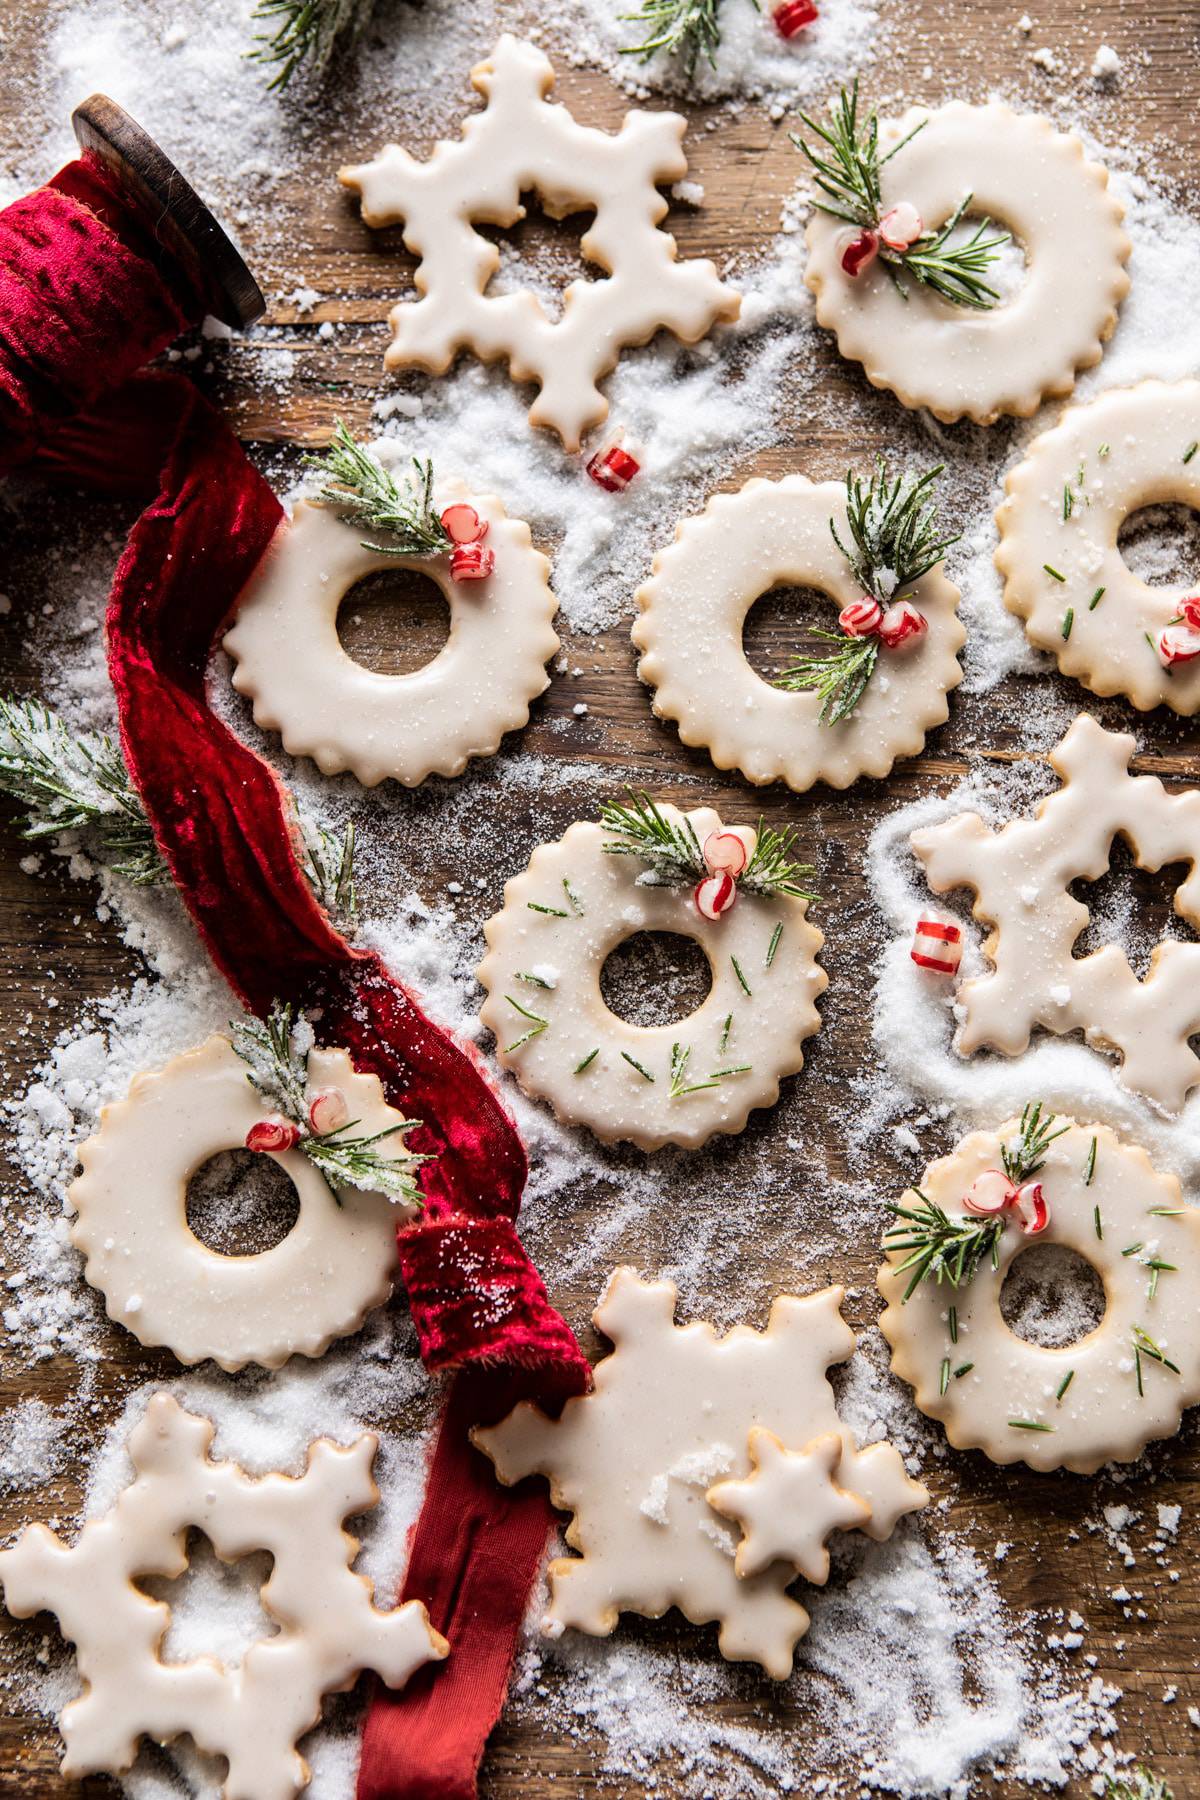 Love the simplicity and elegance of these vanilla wreath cookies by Half Baked Harvest.